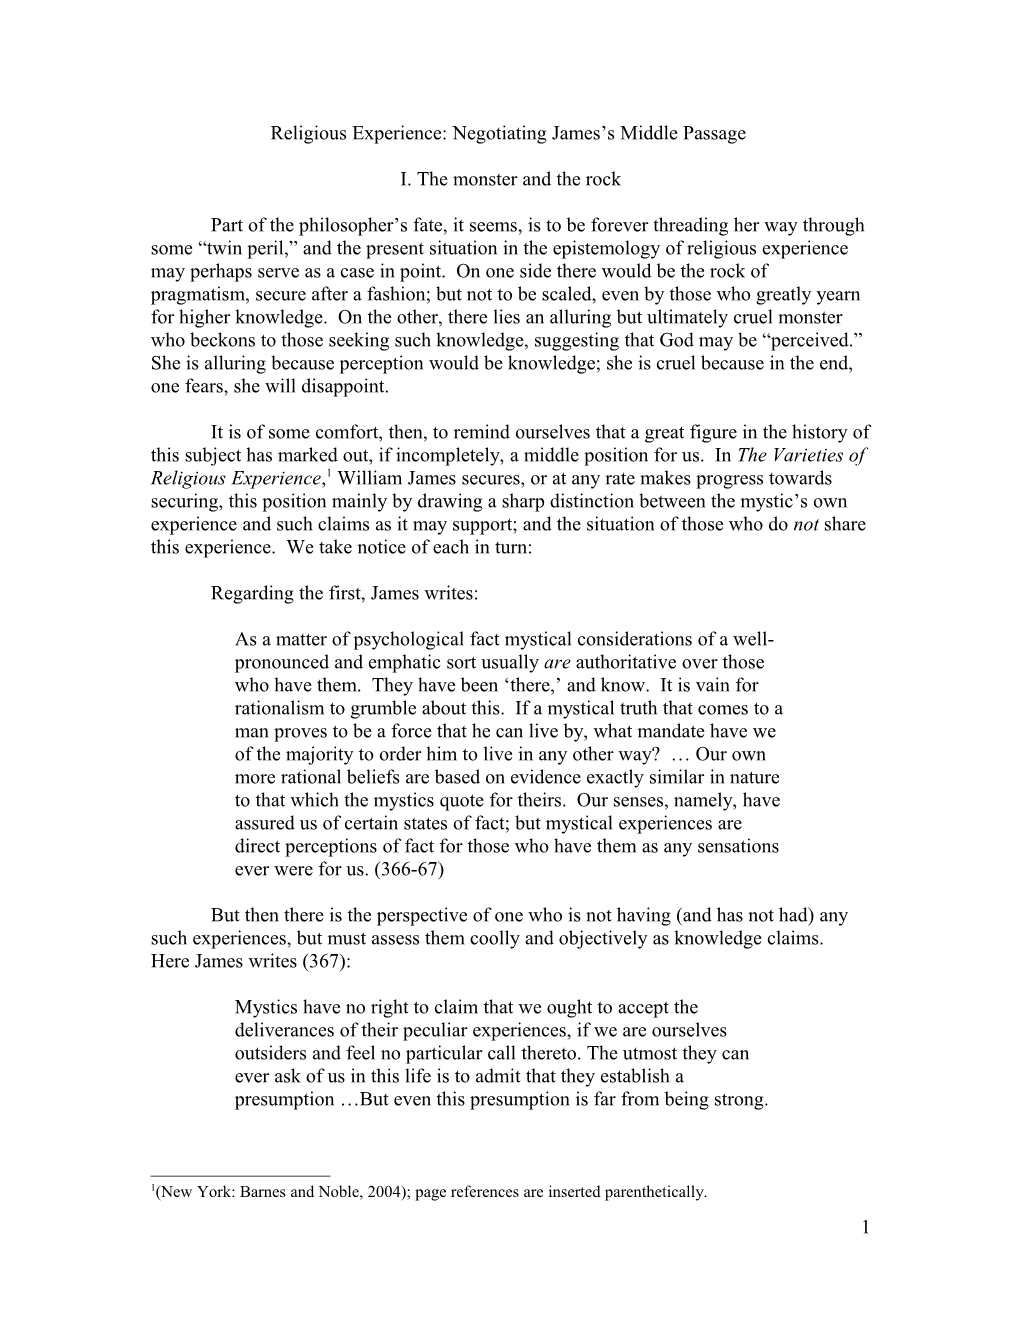 Religious Experience: Negotiating James S Middle Passage (Draft)